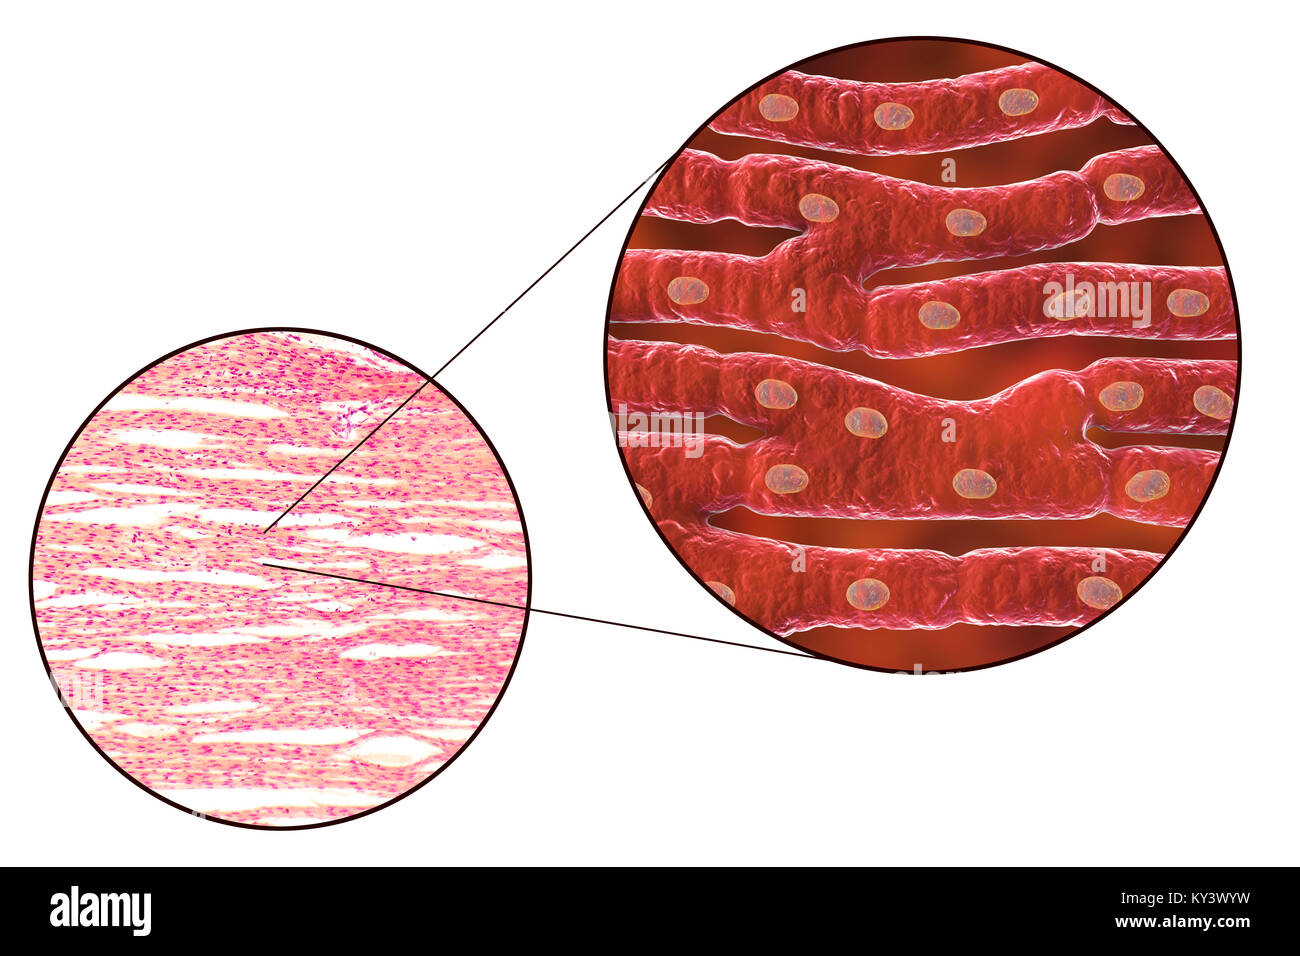 Heart muscle structure, computer illustration and light micrograph. Heart muscle is composed of spindle-shaped cells grouped in irregular bundles. Boundaries between individual cells are faintly visible here. Each cell contains one nucleus, visible as a dark stained spot. Cardiac muscle is a specialised muscle tissue that can contract regularly and continuously without tiring. Stock Photo